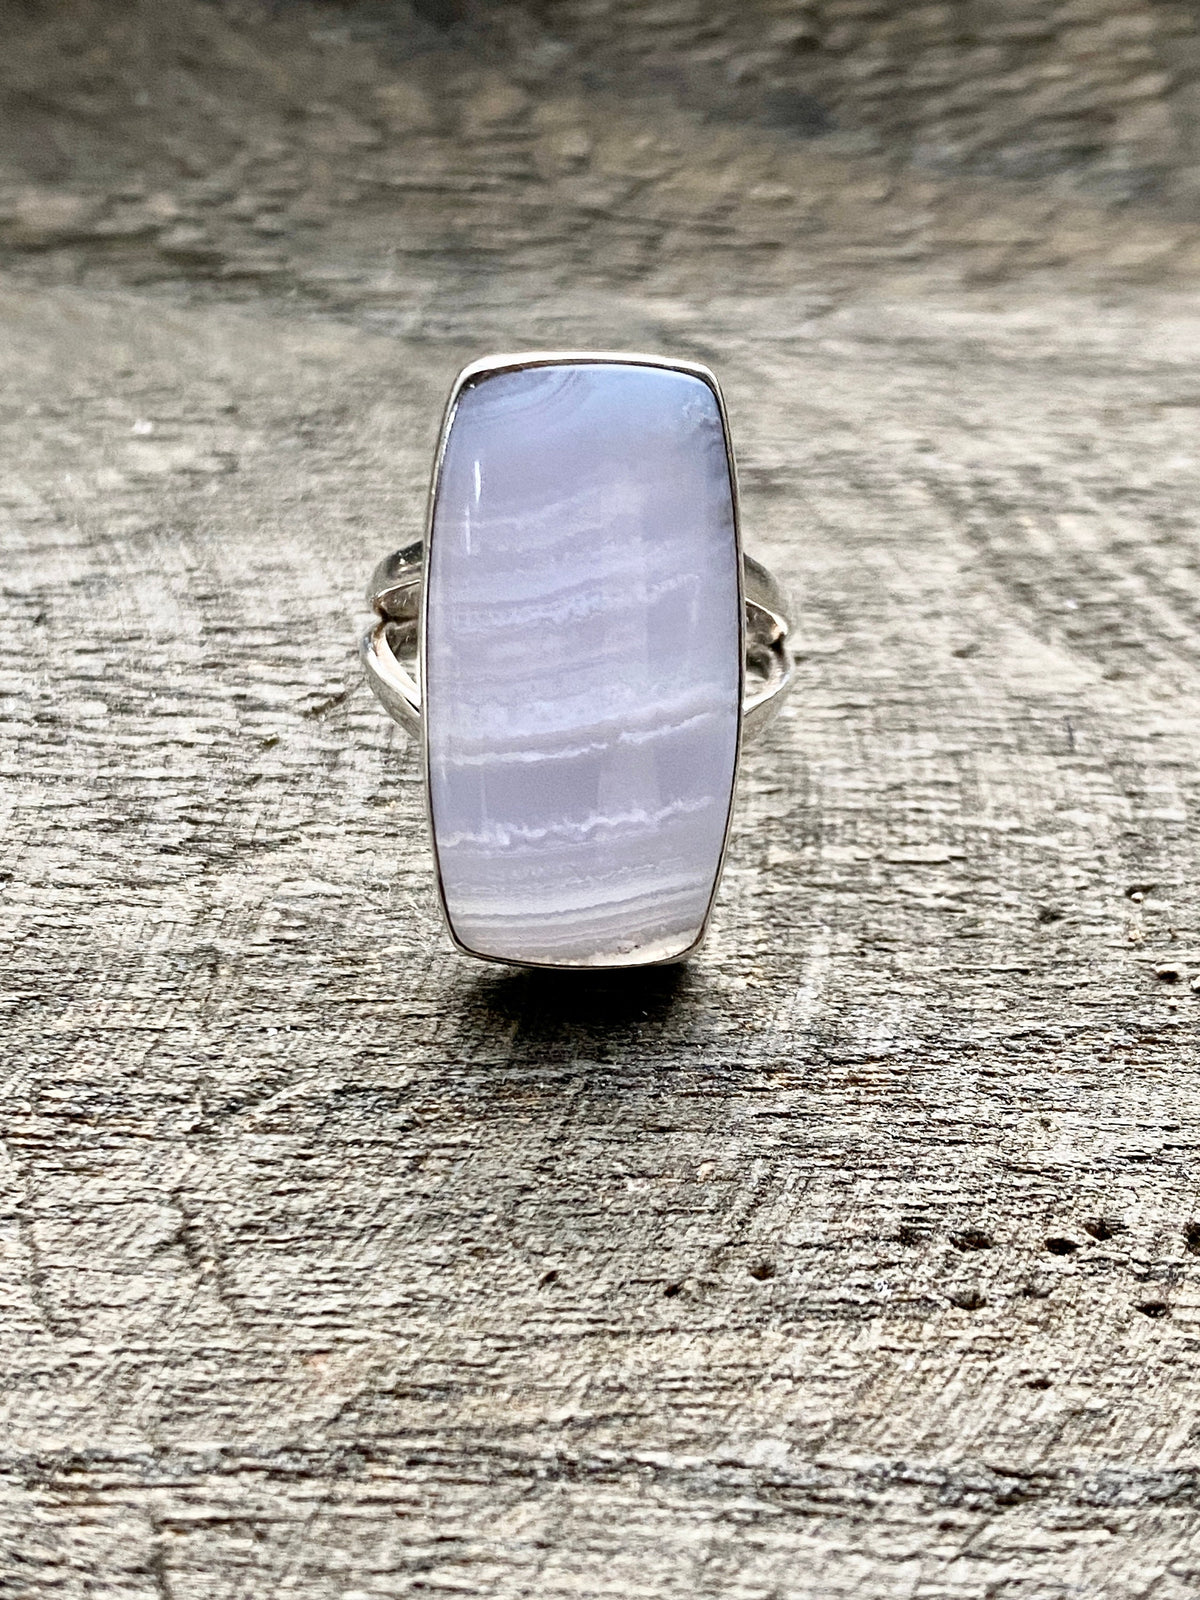 Blue Lace Agate 925 Silver Handmade Ring Size 6 1/2 - Crystal Healing Meditation